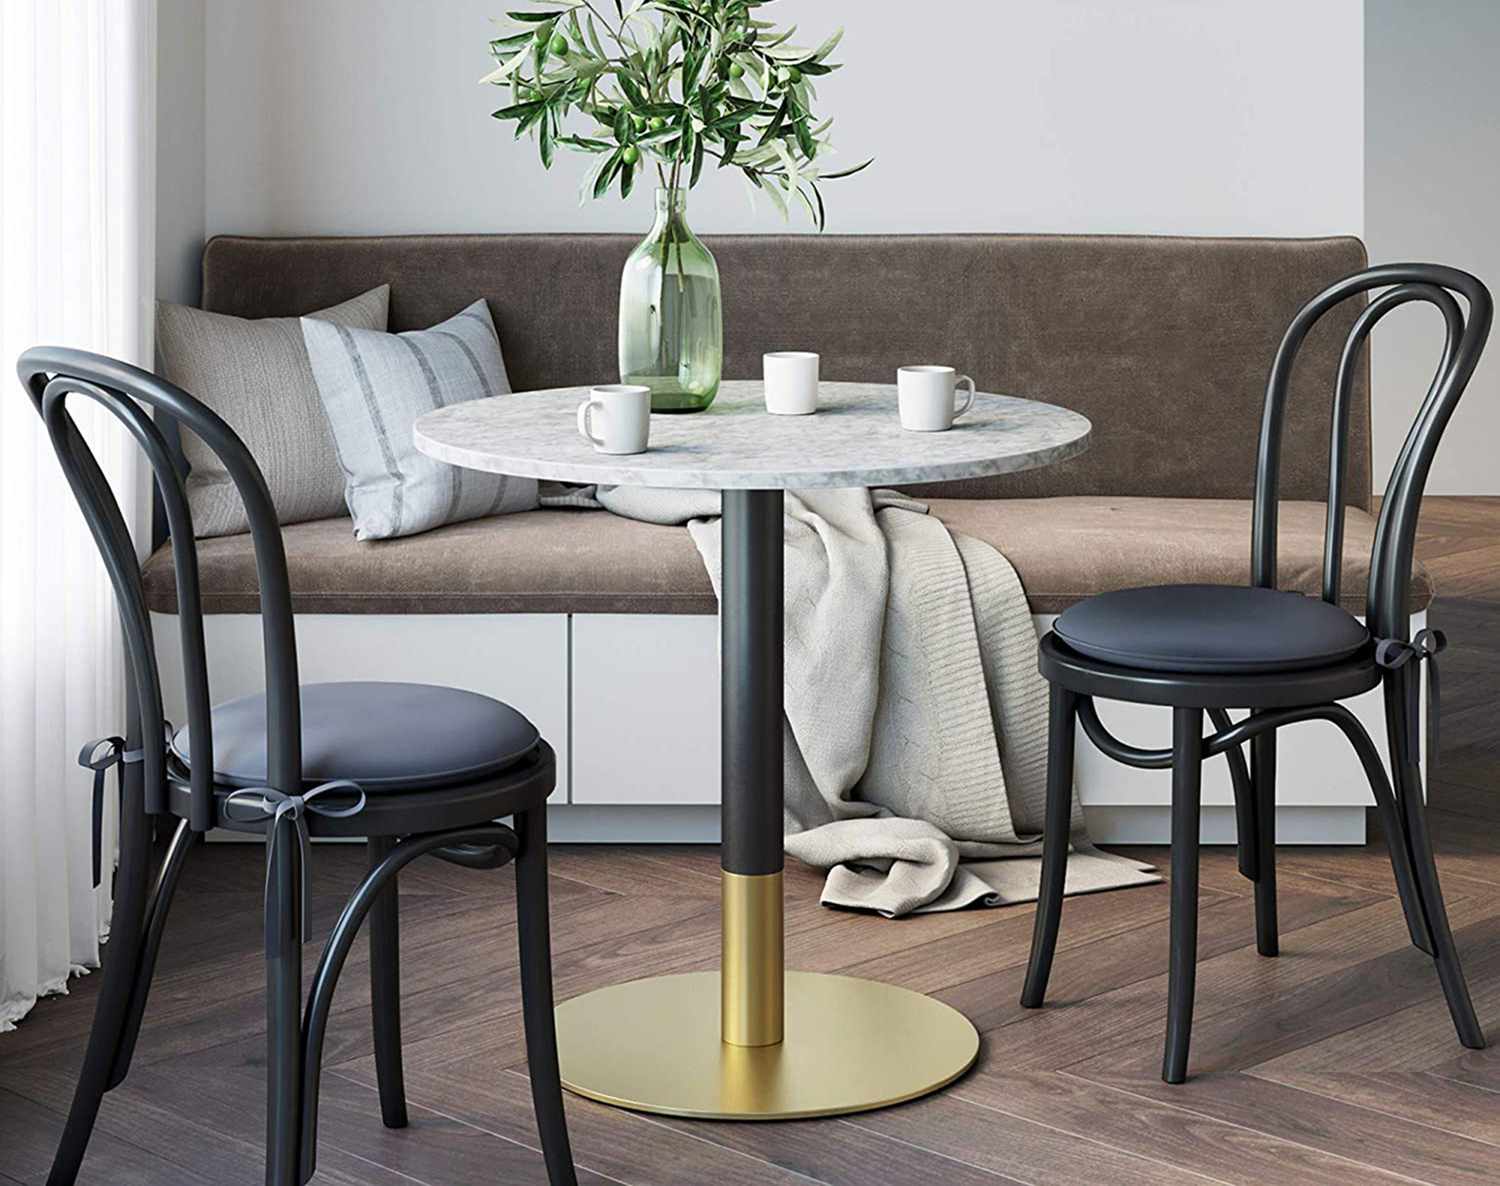 8 Best Dining Tables For Small Spaces, Dining Room Sets With Expandable Table Dimensions